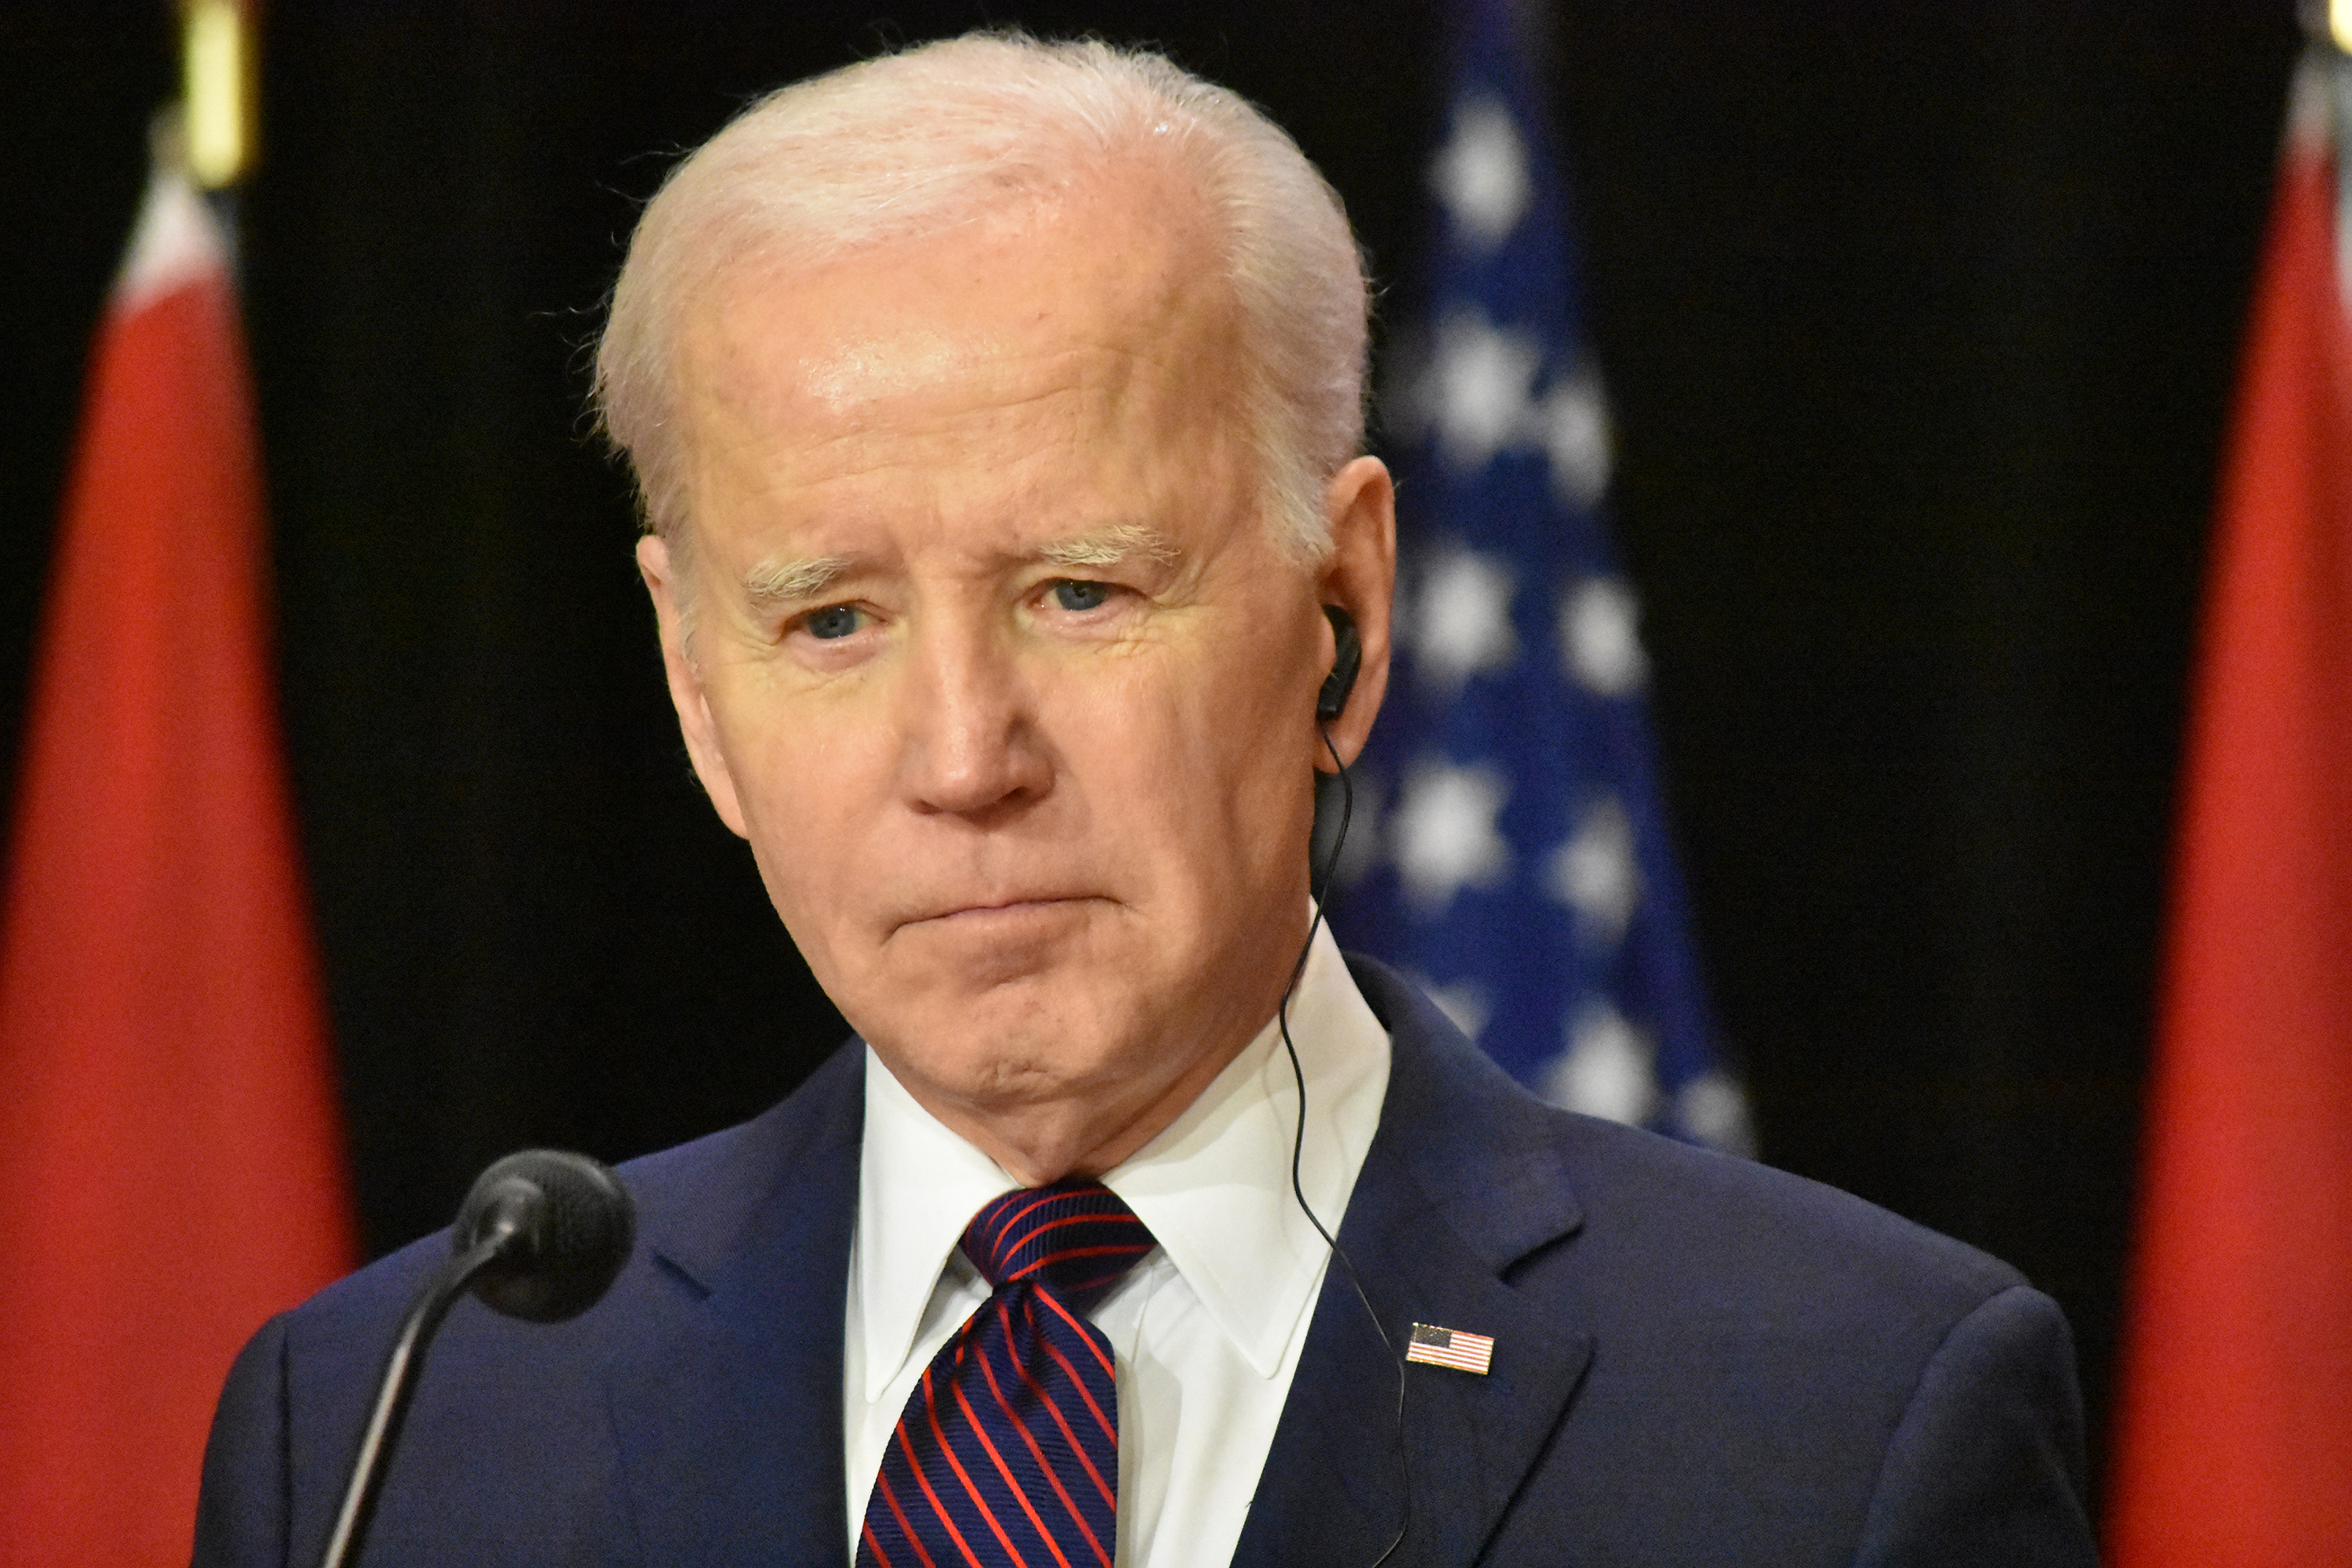 Biden speaks to the media in a joint press conference in Ottawa, Canada on March 24.